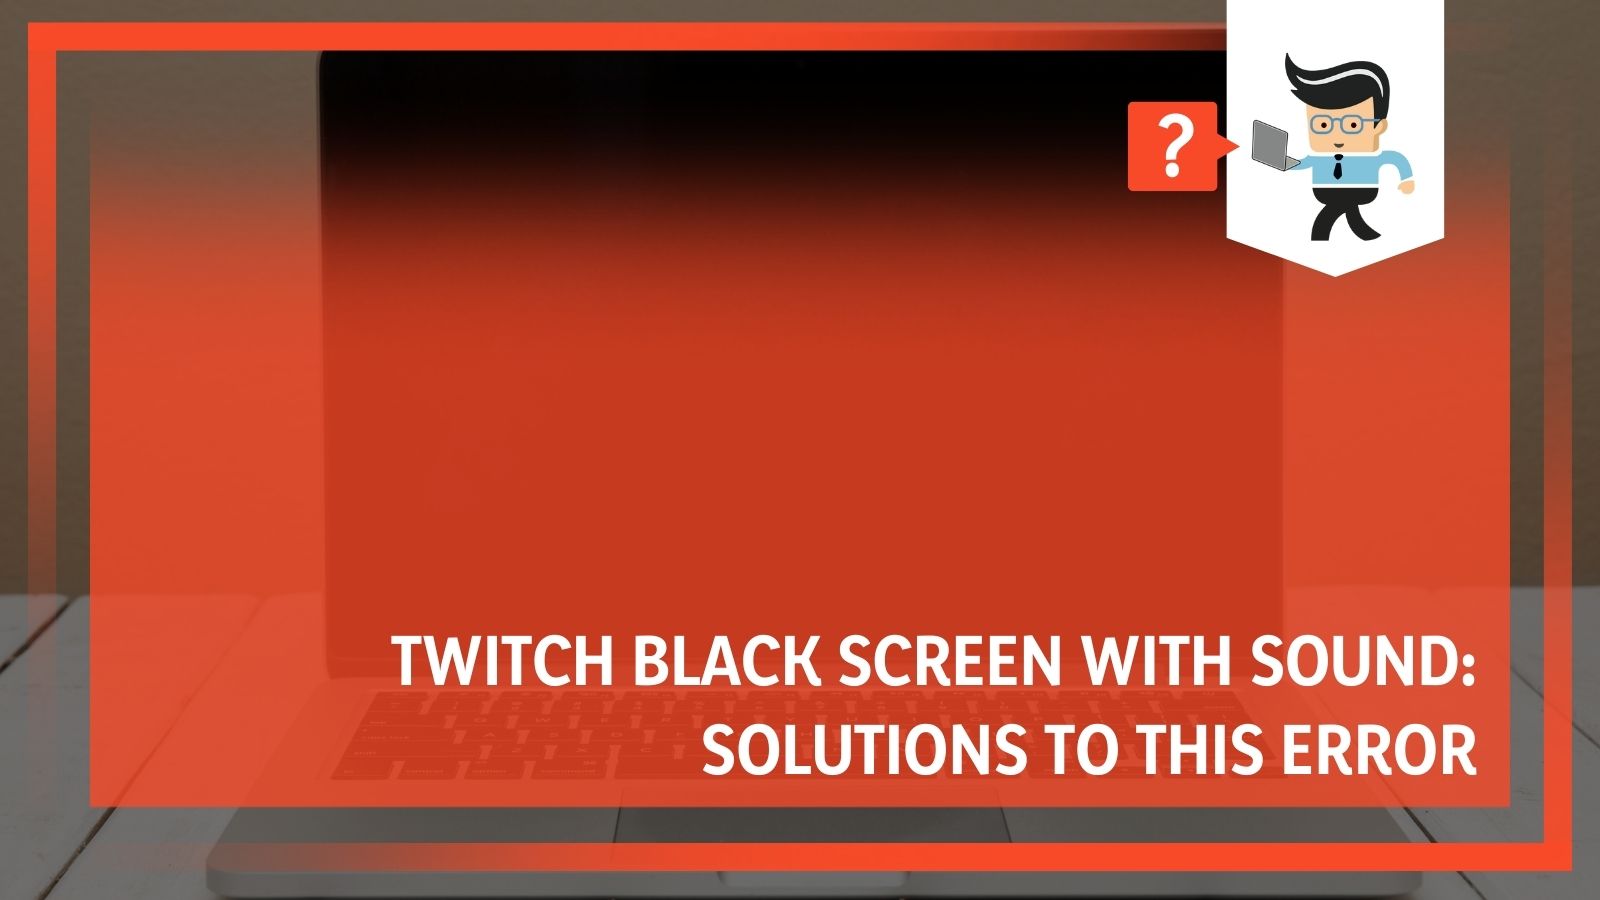 Twitch Black Screen With Sound